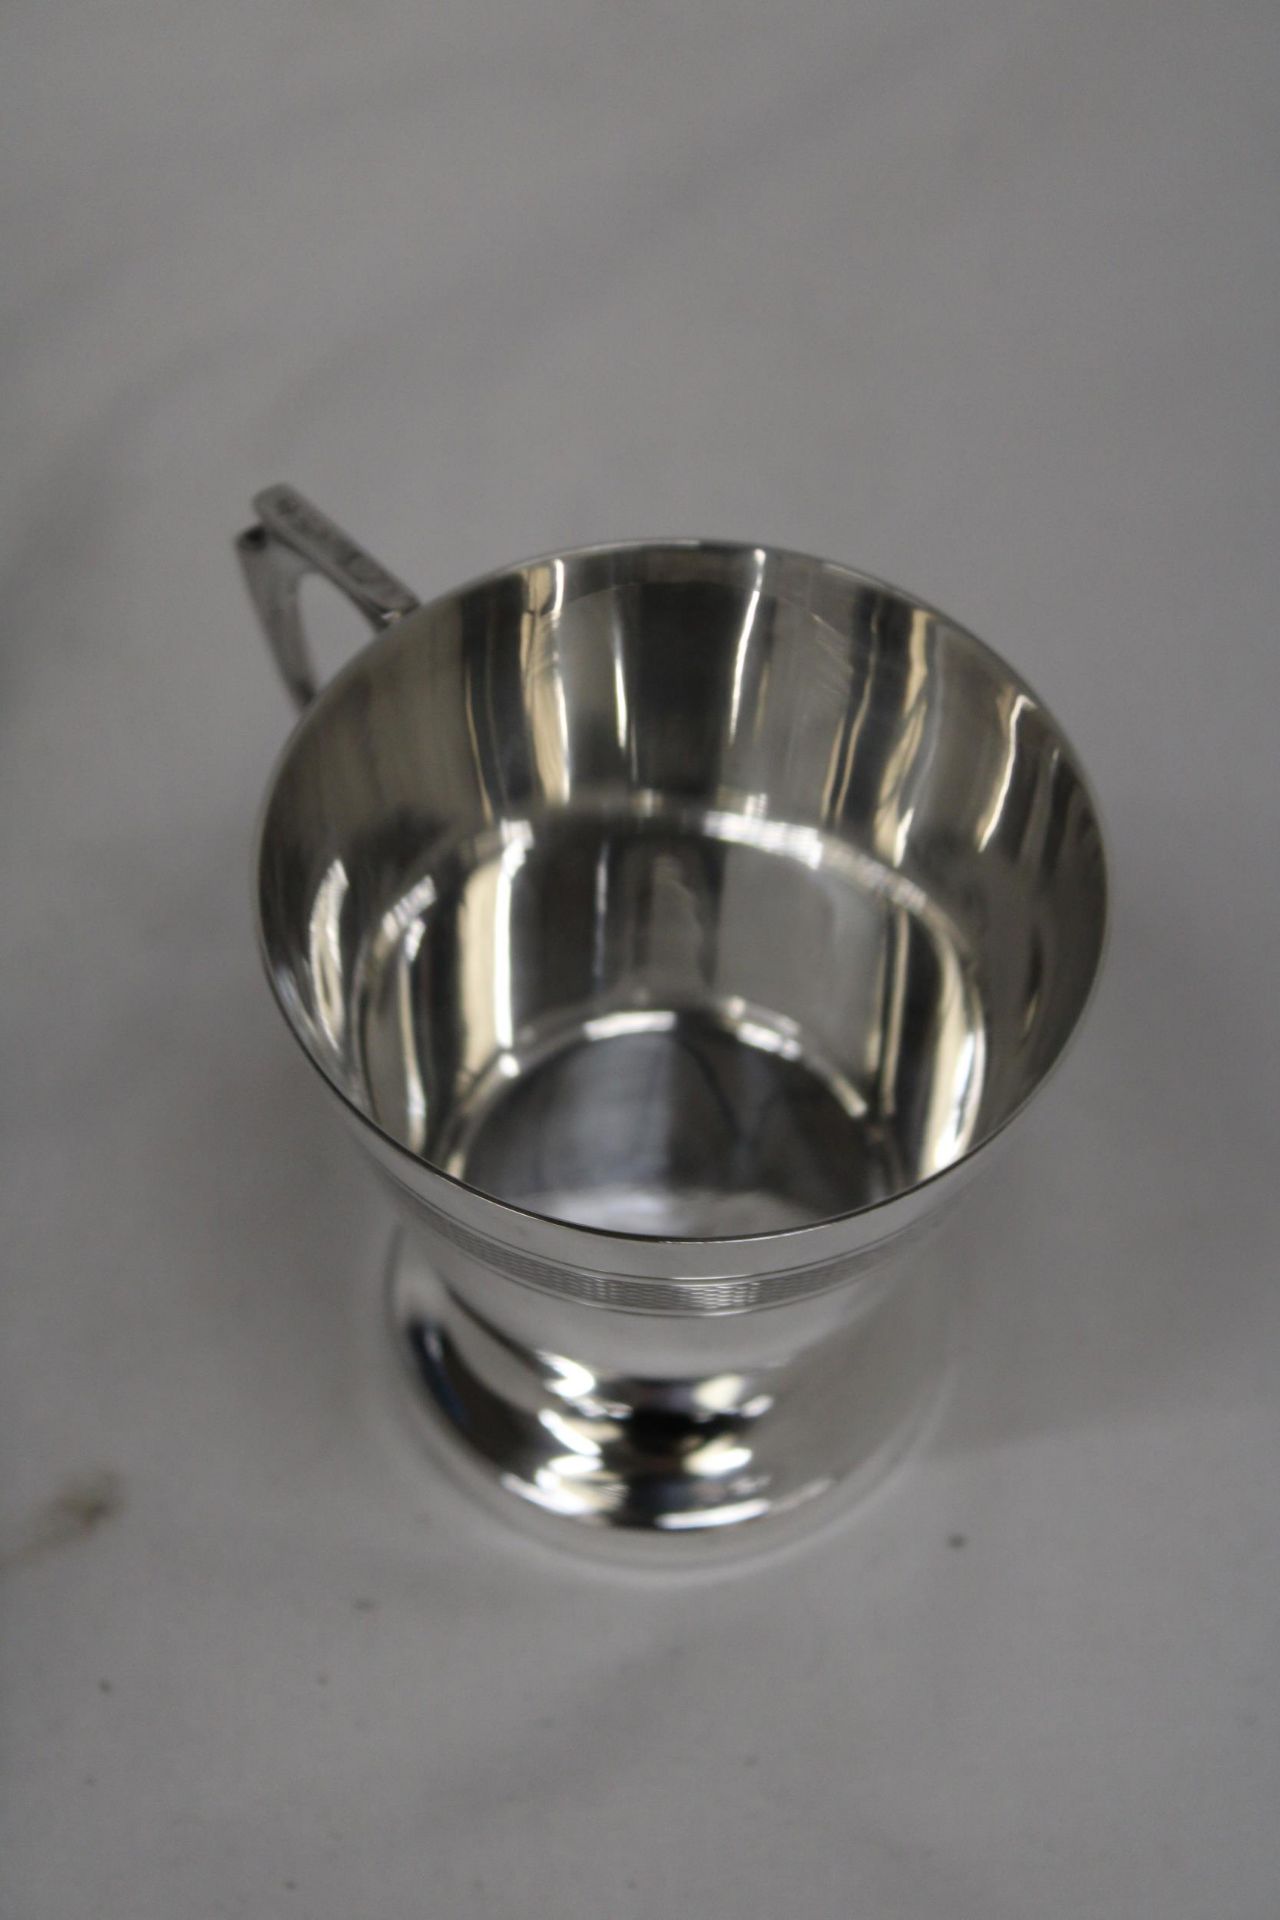 A VINTAGE SILVER PLATED CHRISTENING CUP IN THE ORIGINAL PRESENTATION BOX - Image 3 of 5